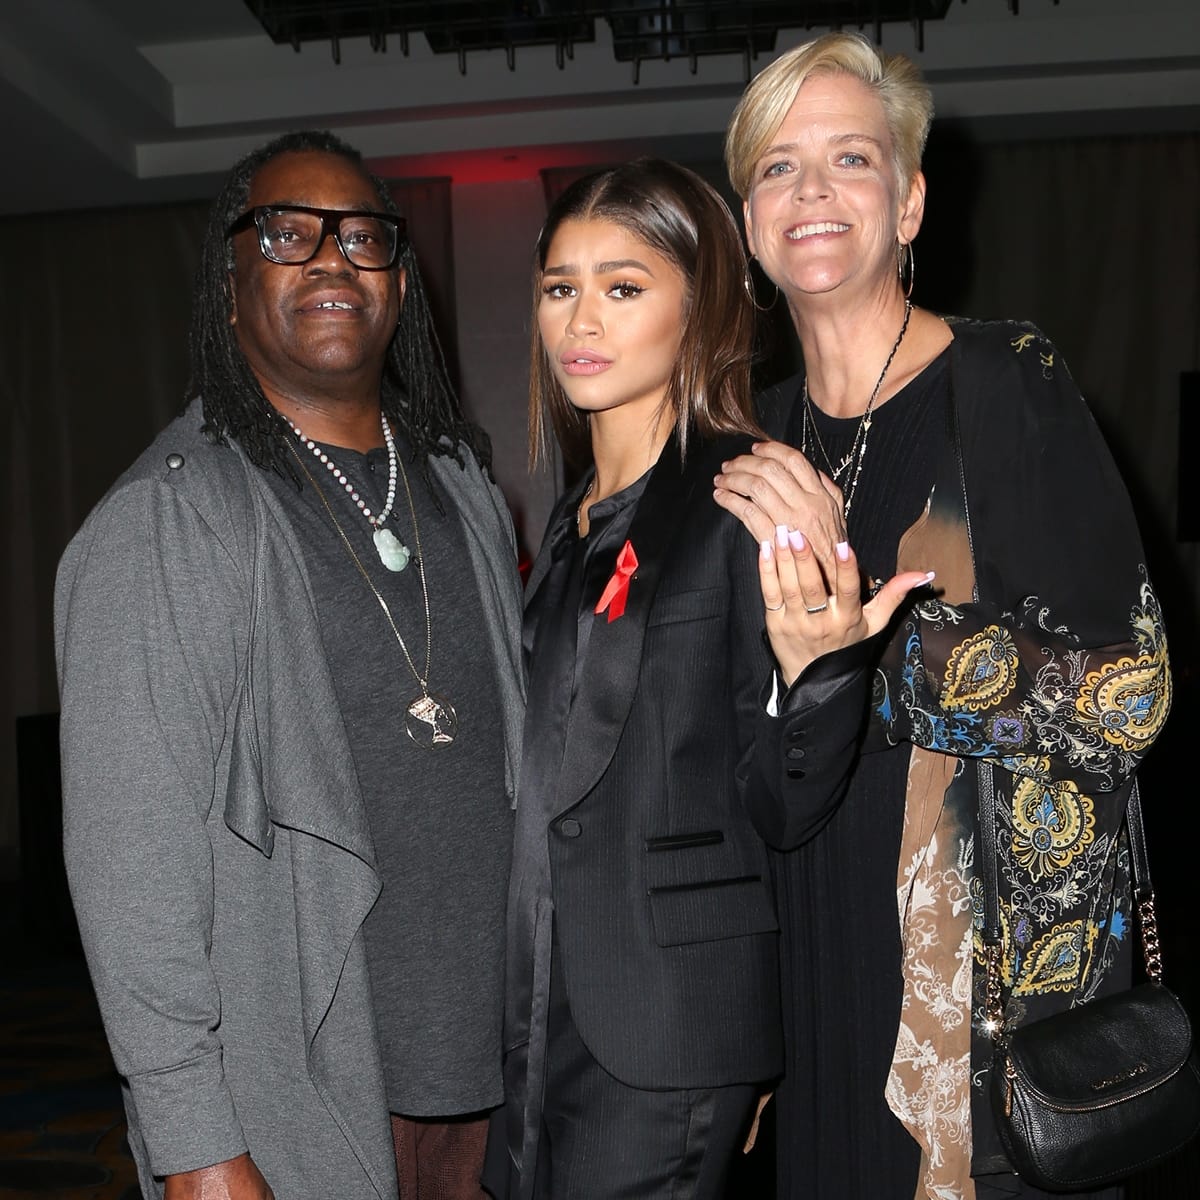 Zendaya's parents Kazembe Ajamu Coleman and Claire Stoermer filed for divorce in 2016 after 8 years of marriage